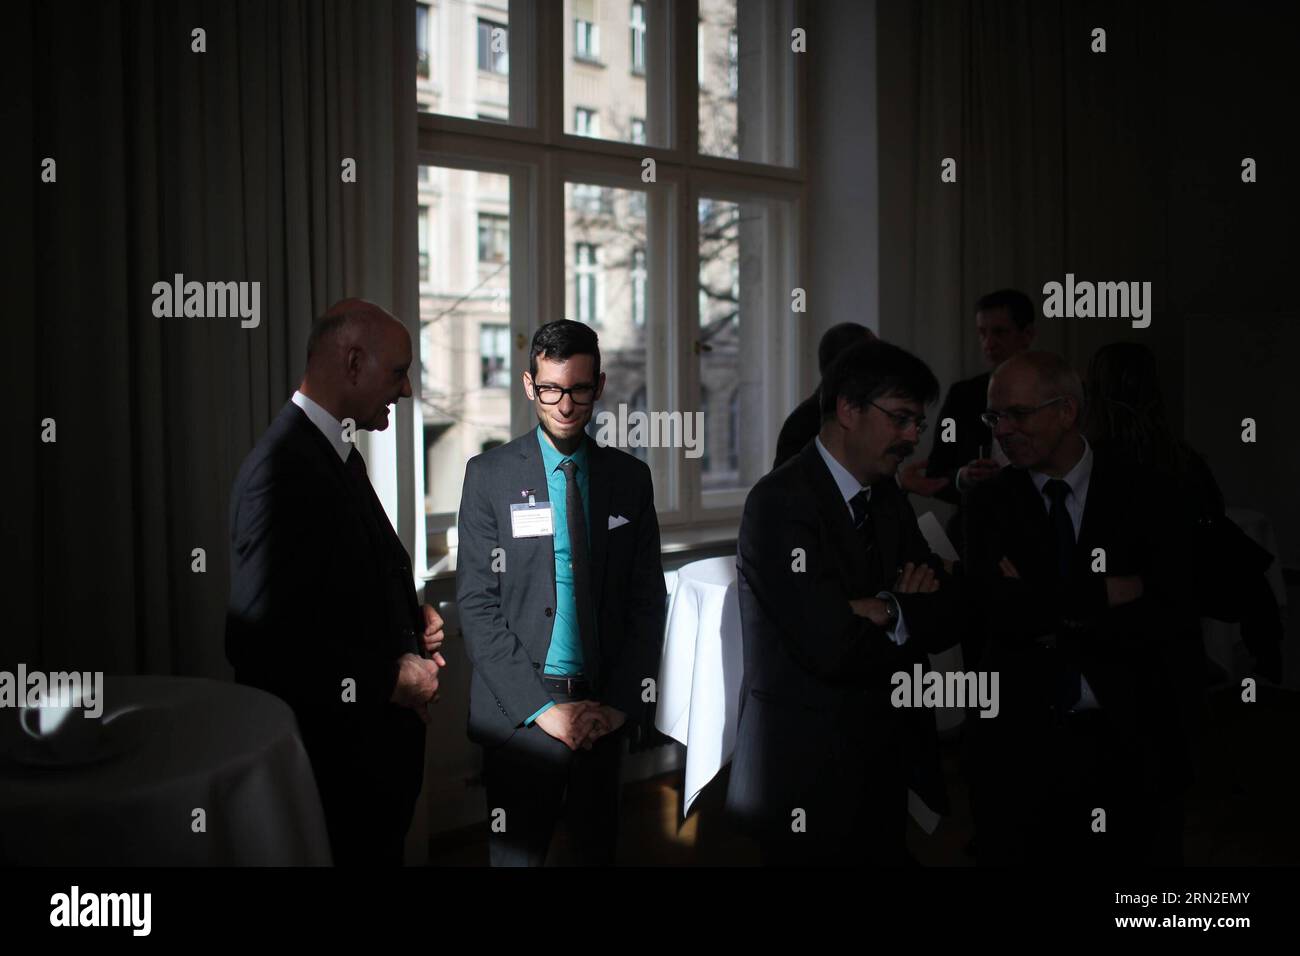 (150303) -- BENLIN, March 3, 2015 -- Delegates talk prior to the 2015 Leibniz Prize award ceremony in Berlin, Germany, on March 3, 2015. The Leibniz Prize, one of Germany s most prestigious research funding prizes was awarded to 8 researchers by German Research Foundation (DFG) this year. ) GERMANY-BENLIN-LEIBNIZ PRIZE-AWARD CEREMONY ZhangxFan PUBLICATIONxNOTxINxCHN   March 3 2015 Delegates Talk Prior to The 2015 Leibniz Prize Award Ceremony in Berlin Germany ON March 3 2015 The Leibniz Prize One of Germany S Most prestigious Research Funding Prizes what awarded to 8 Researchers by German Rese Stock Photo